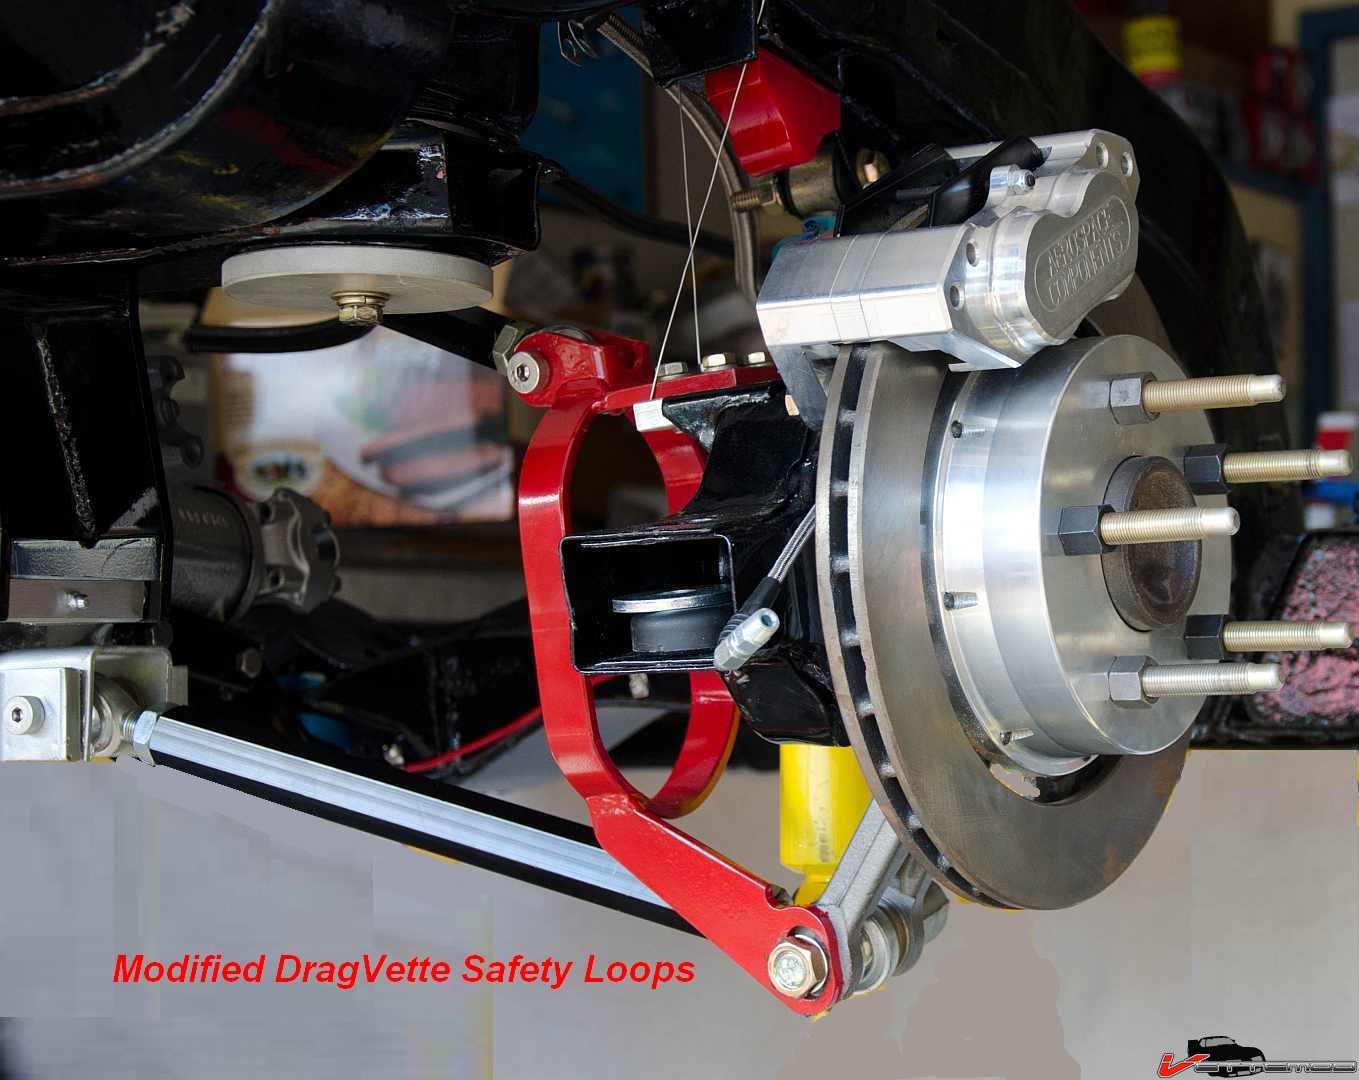 002 dragvett safety loop modified a1.jpg